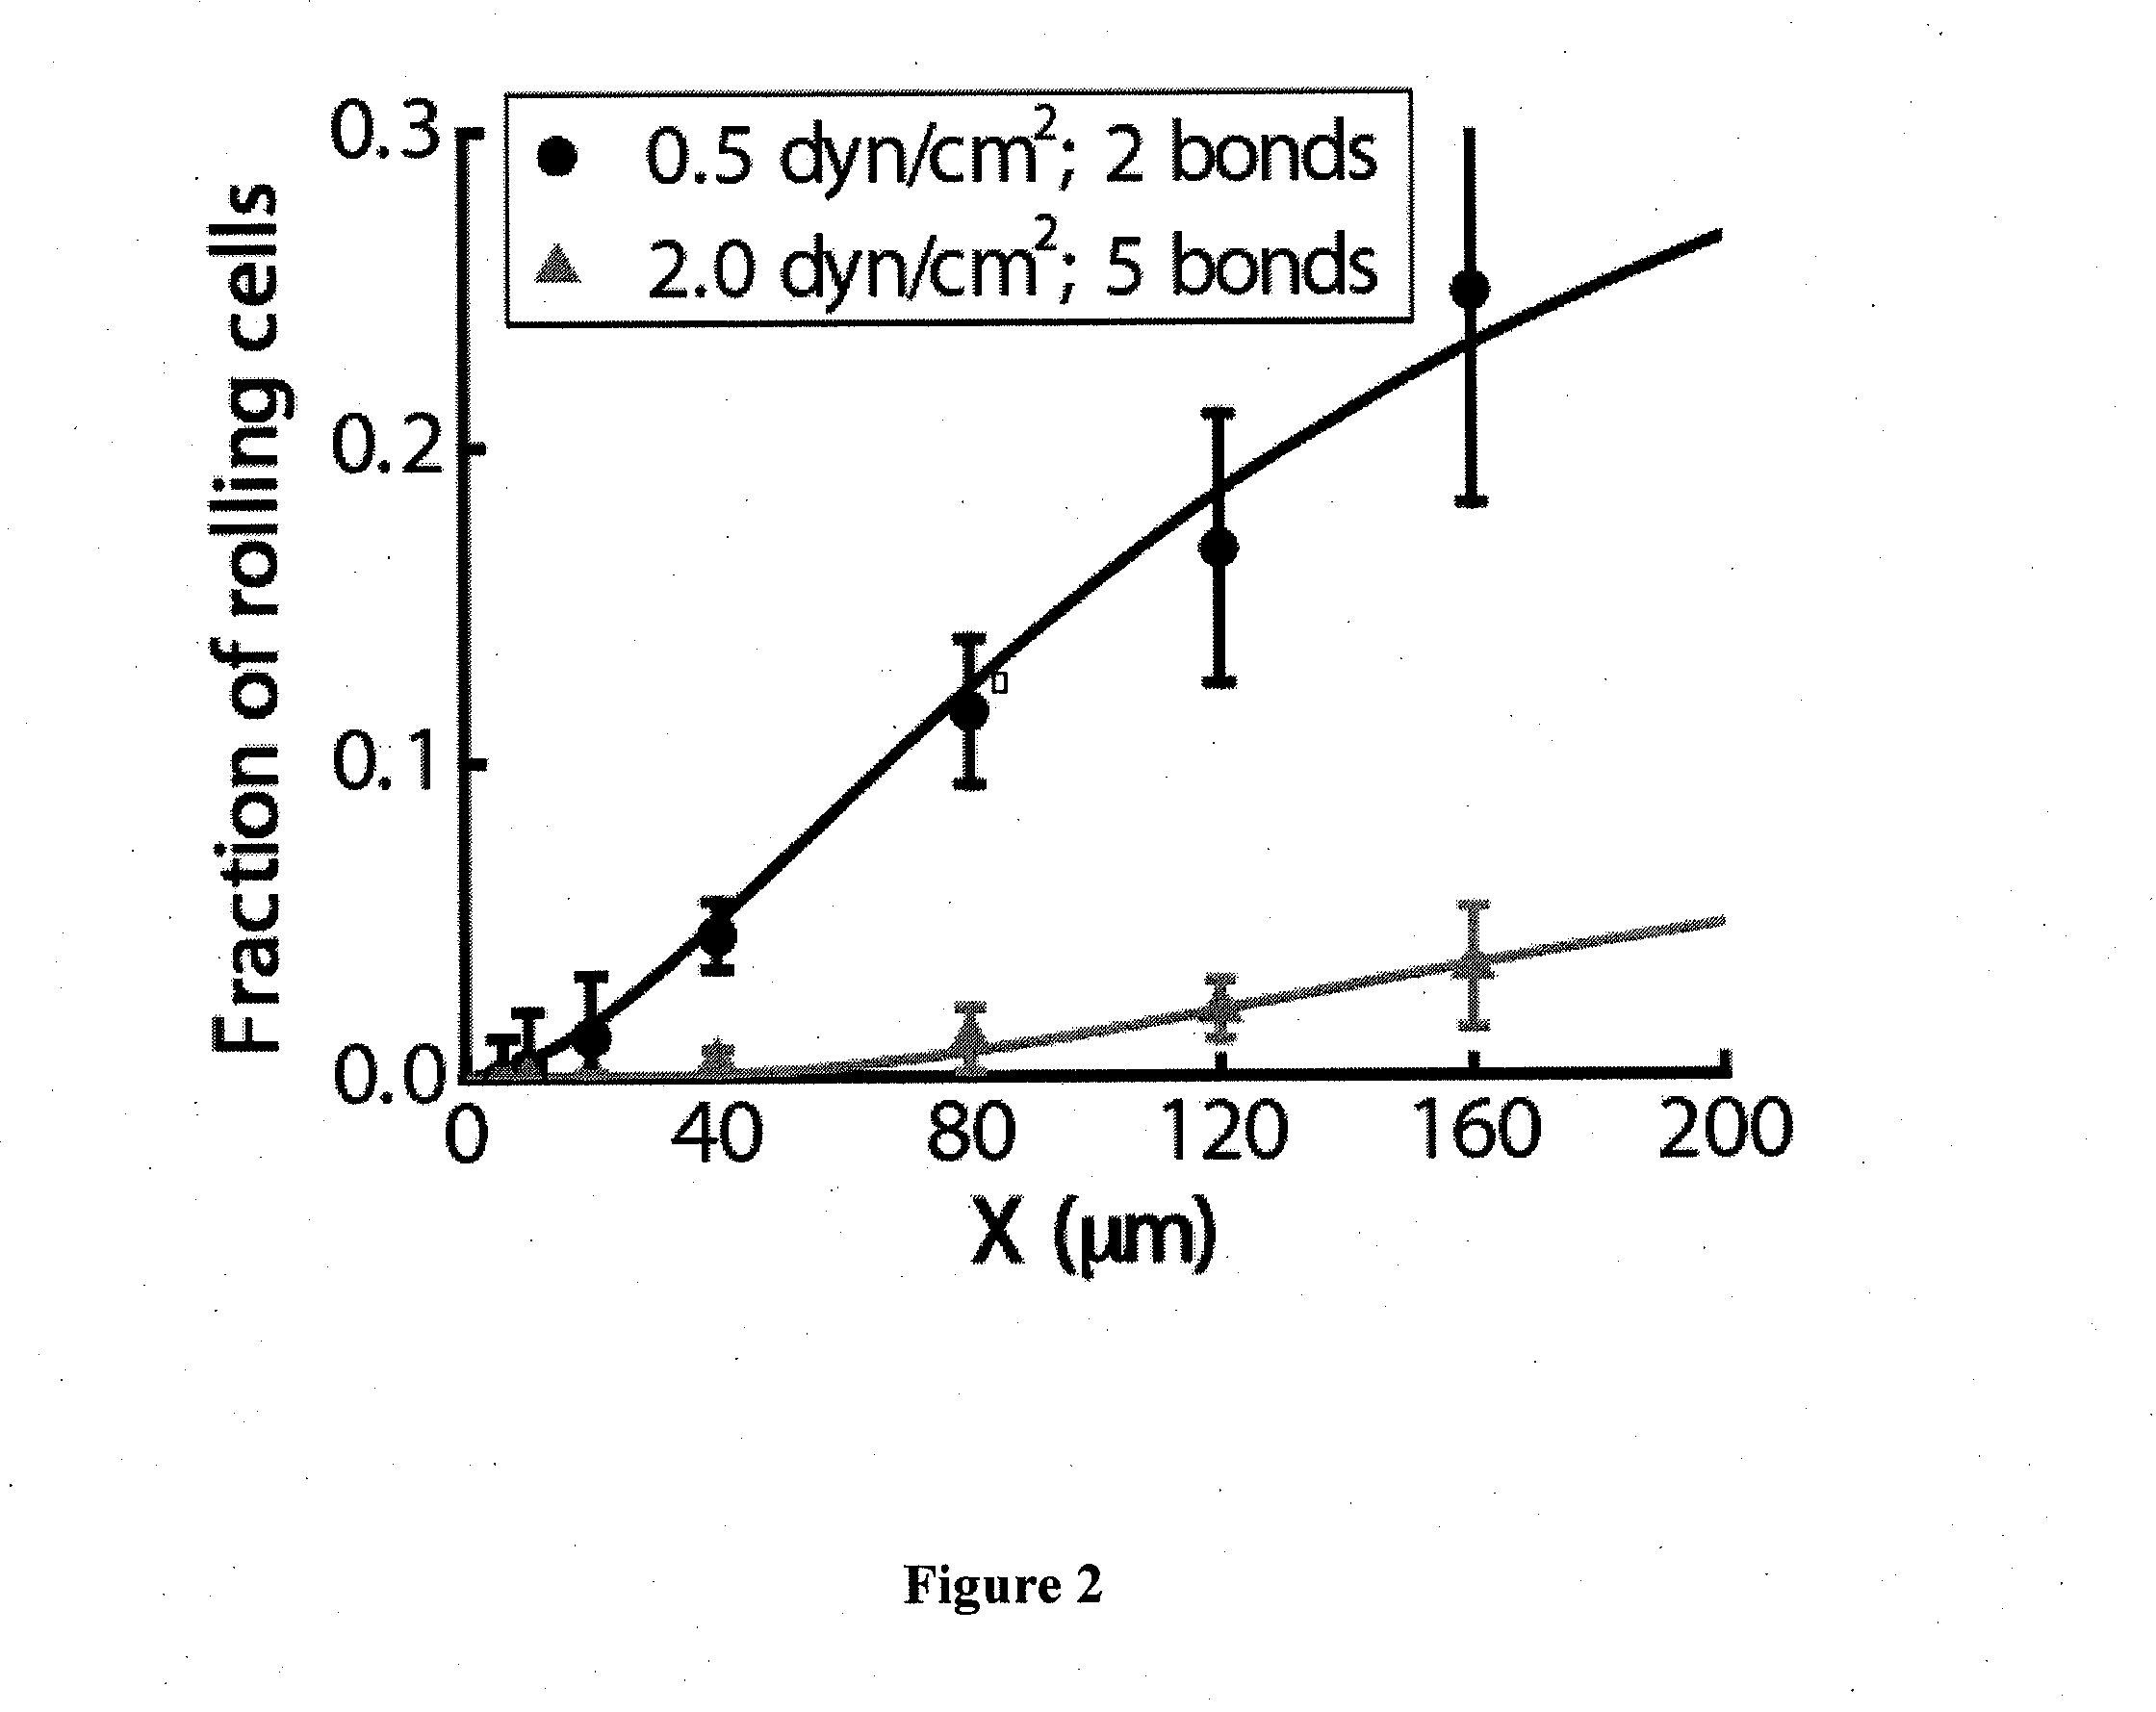 Device for capture, enumeration, and profiling of circulating tumor cells